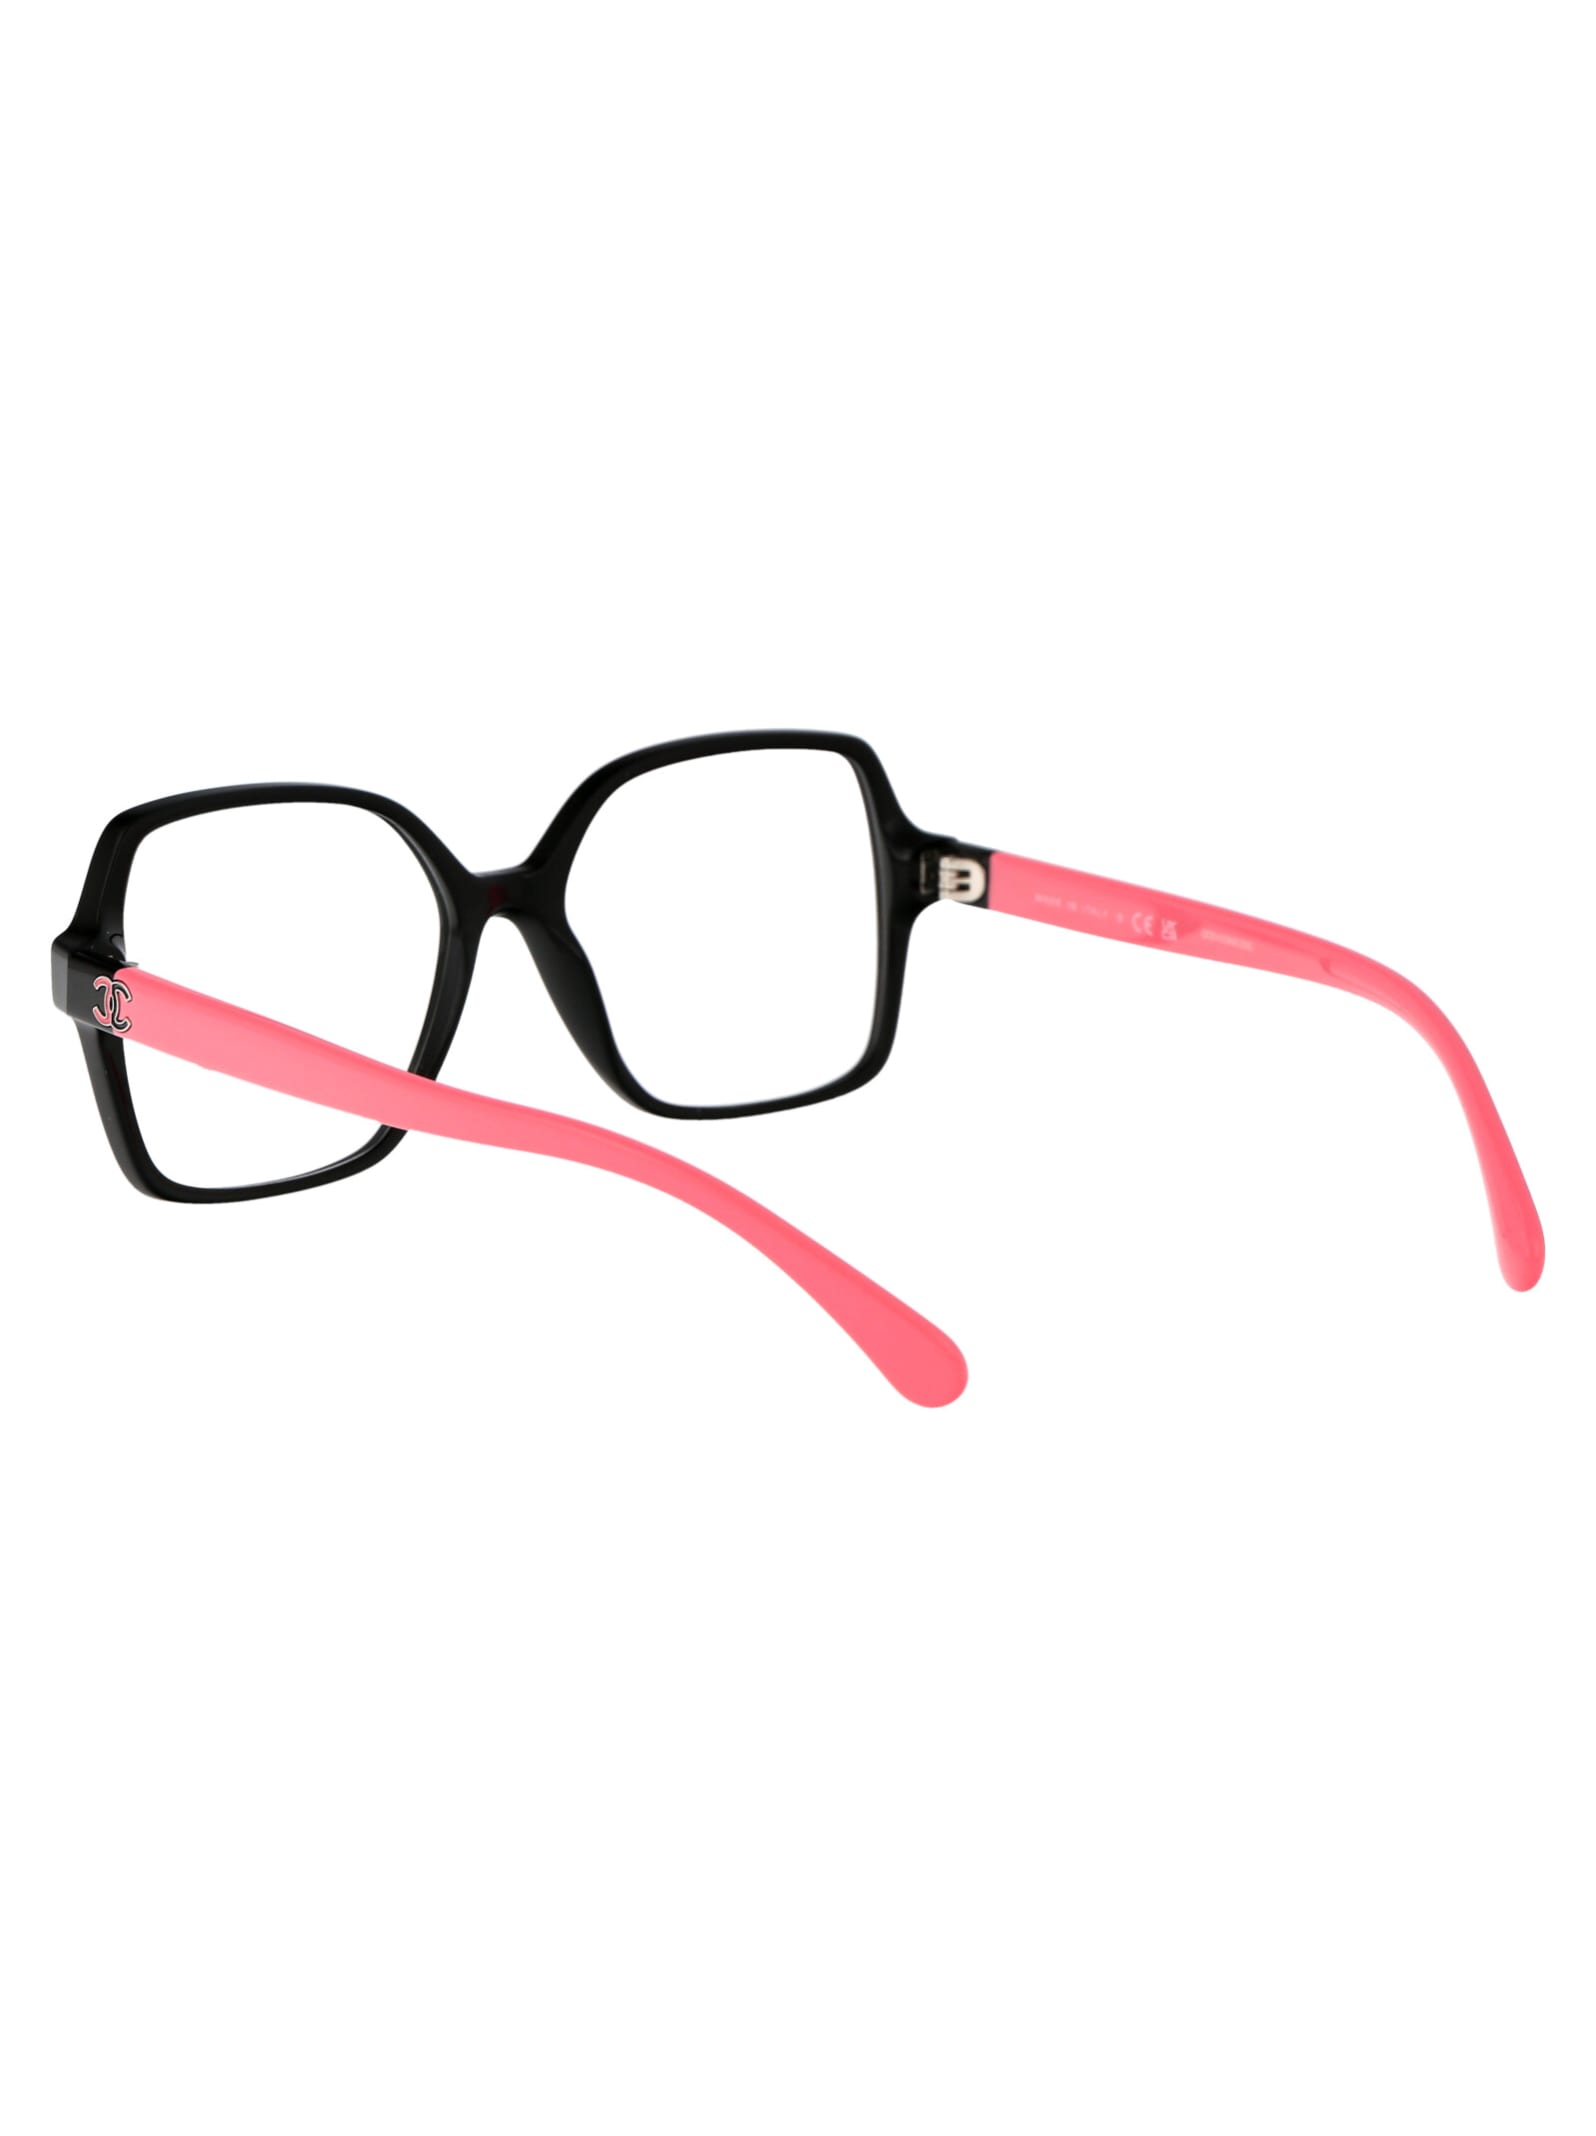 Pre-owned Chanel 0ch3473 Glasses In C535 Black